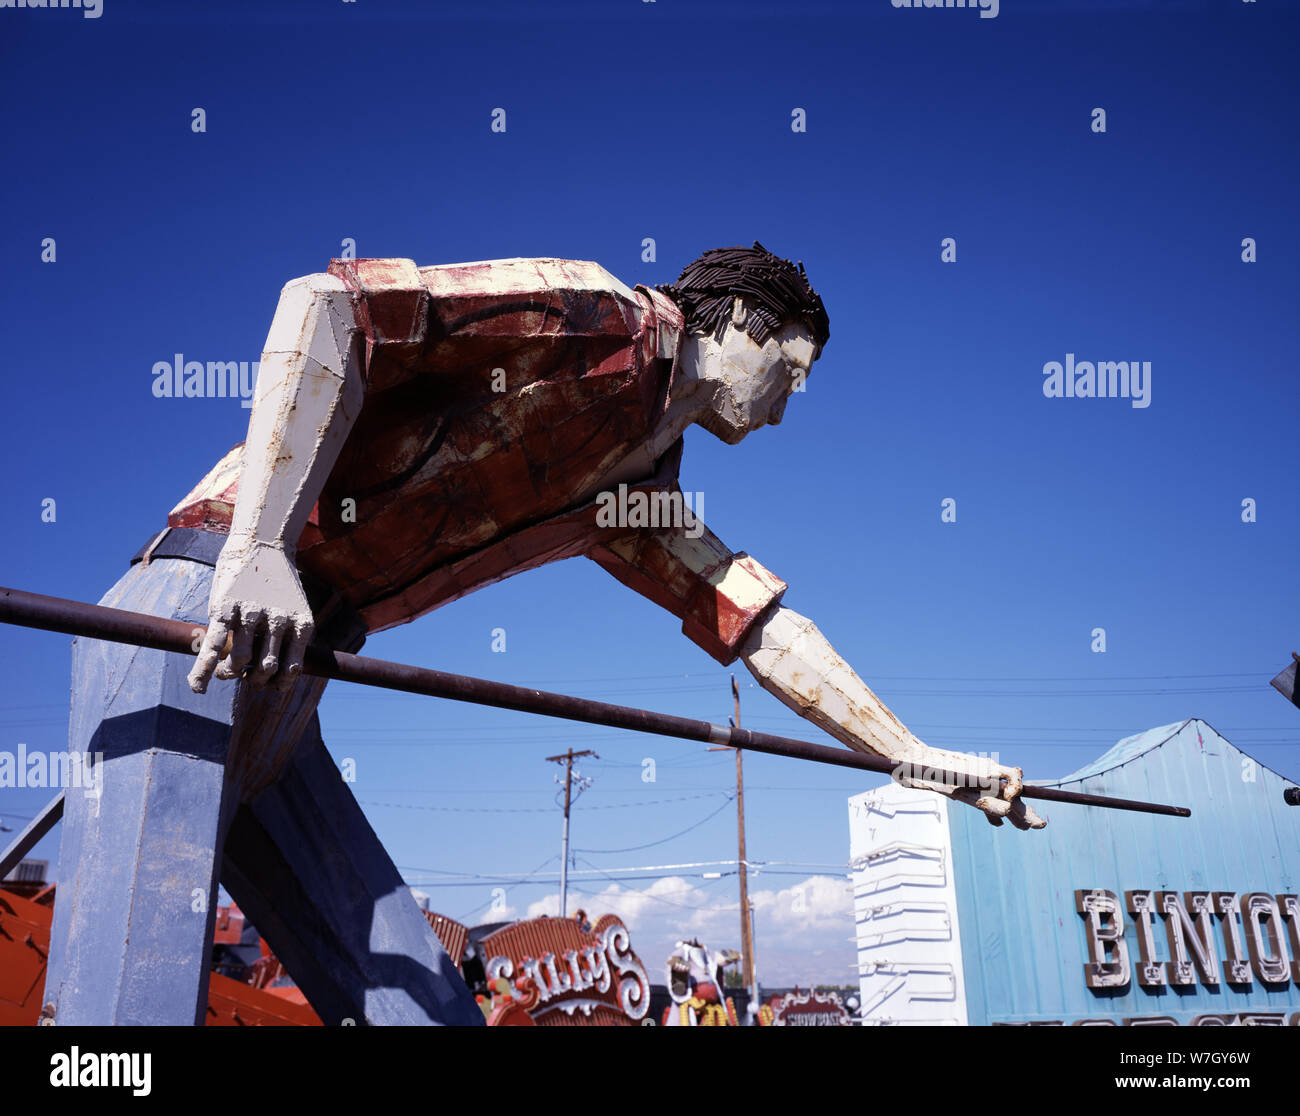 Billiards player from the old Pocket Lounge, now consigned to the city's Neon Museum Boneyard, Las Vegas, Nevada Stock Photo